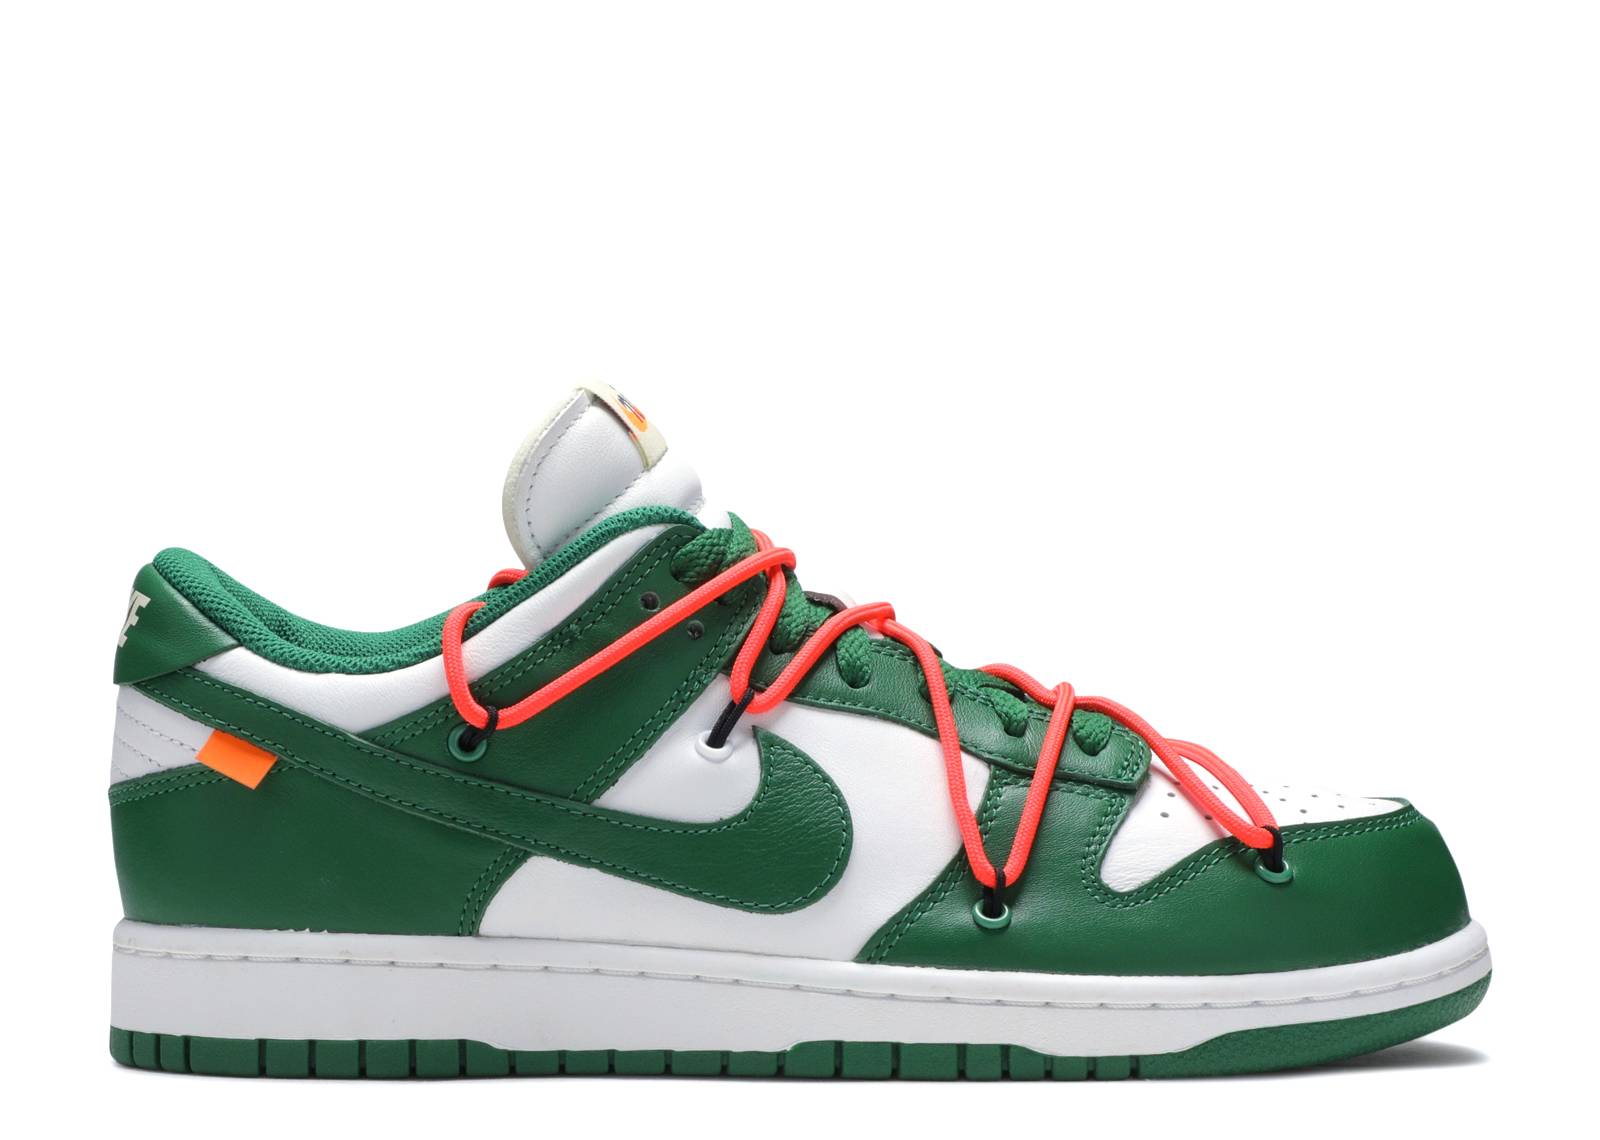 Second Chance - Nike Dunk Low Off-White Pine Green (2019) - 44.5